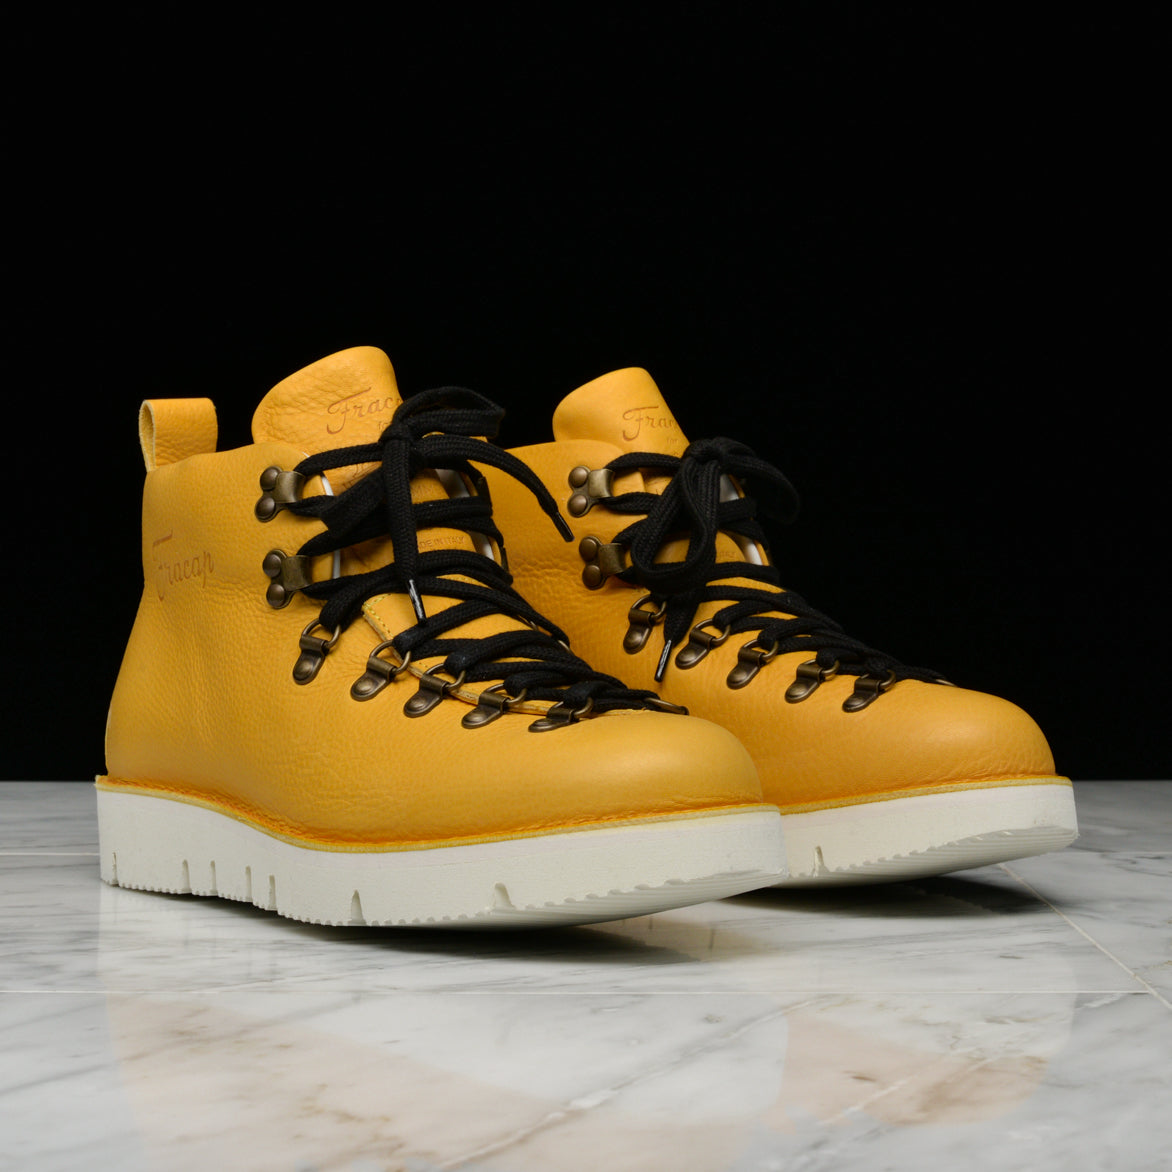 FRACAP FOR LAPSTONE & HAMMER M120 "TAXI"